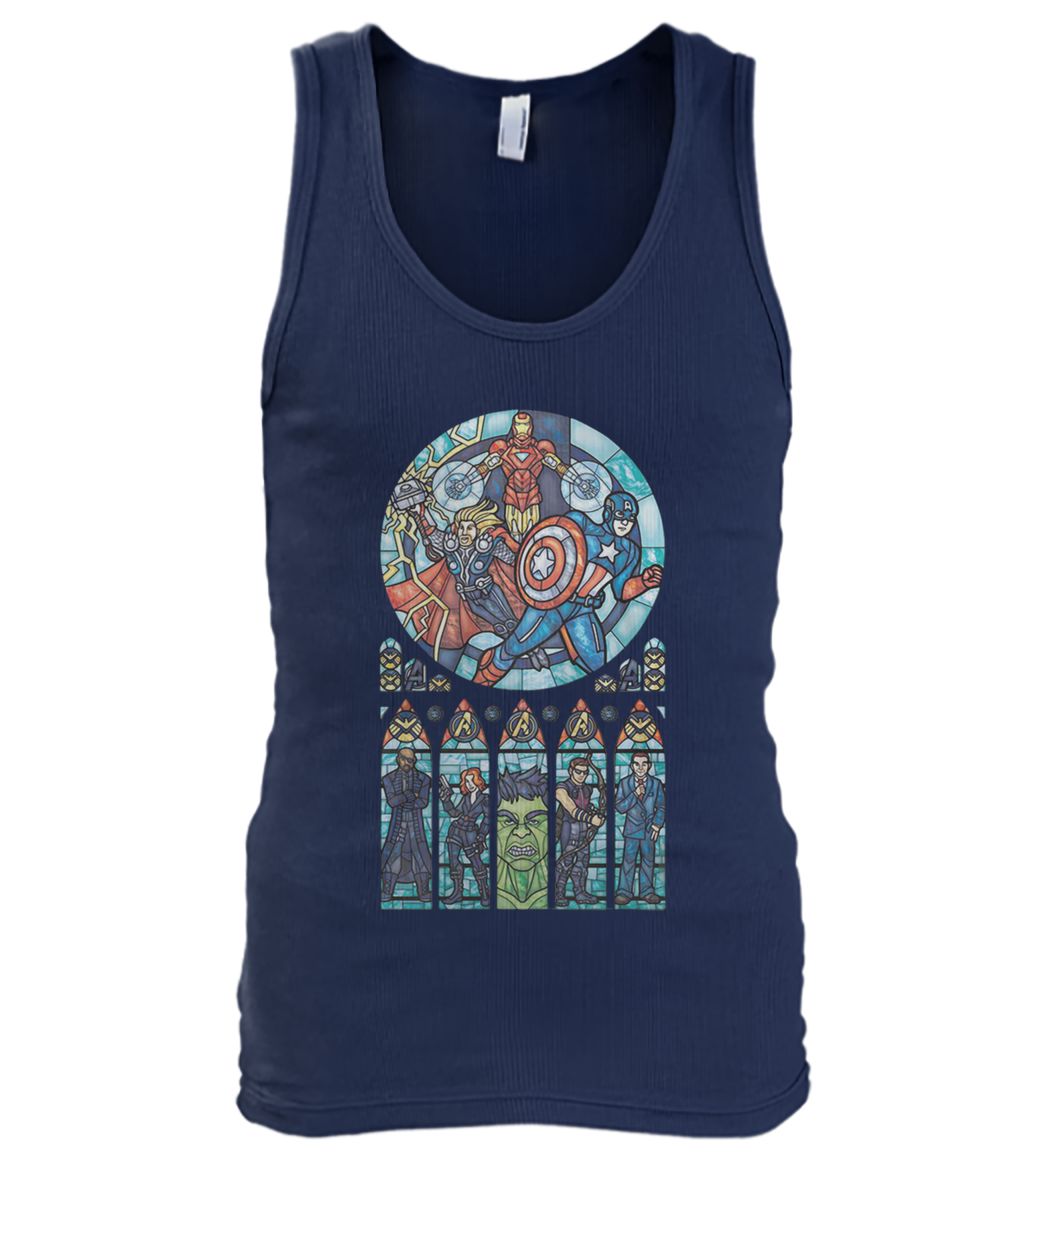 Stained glass windows avengers superheroes men's tank top